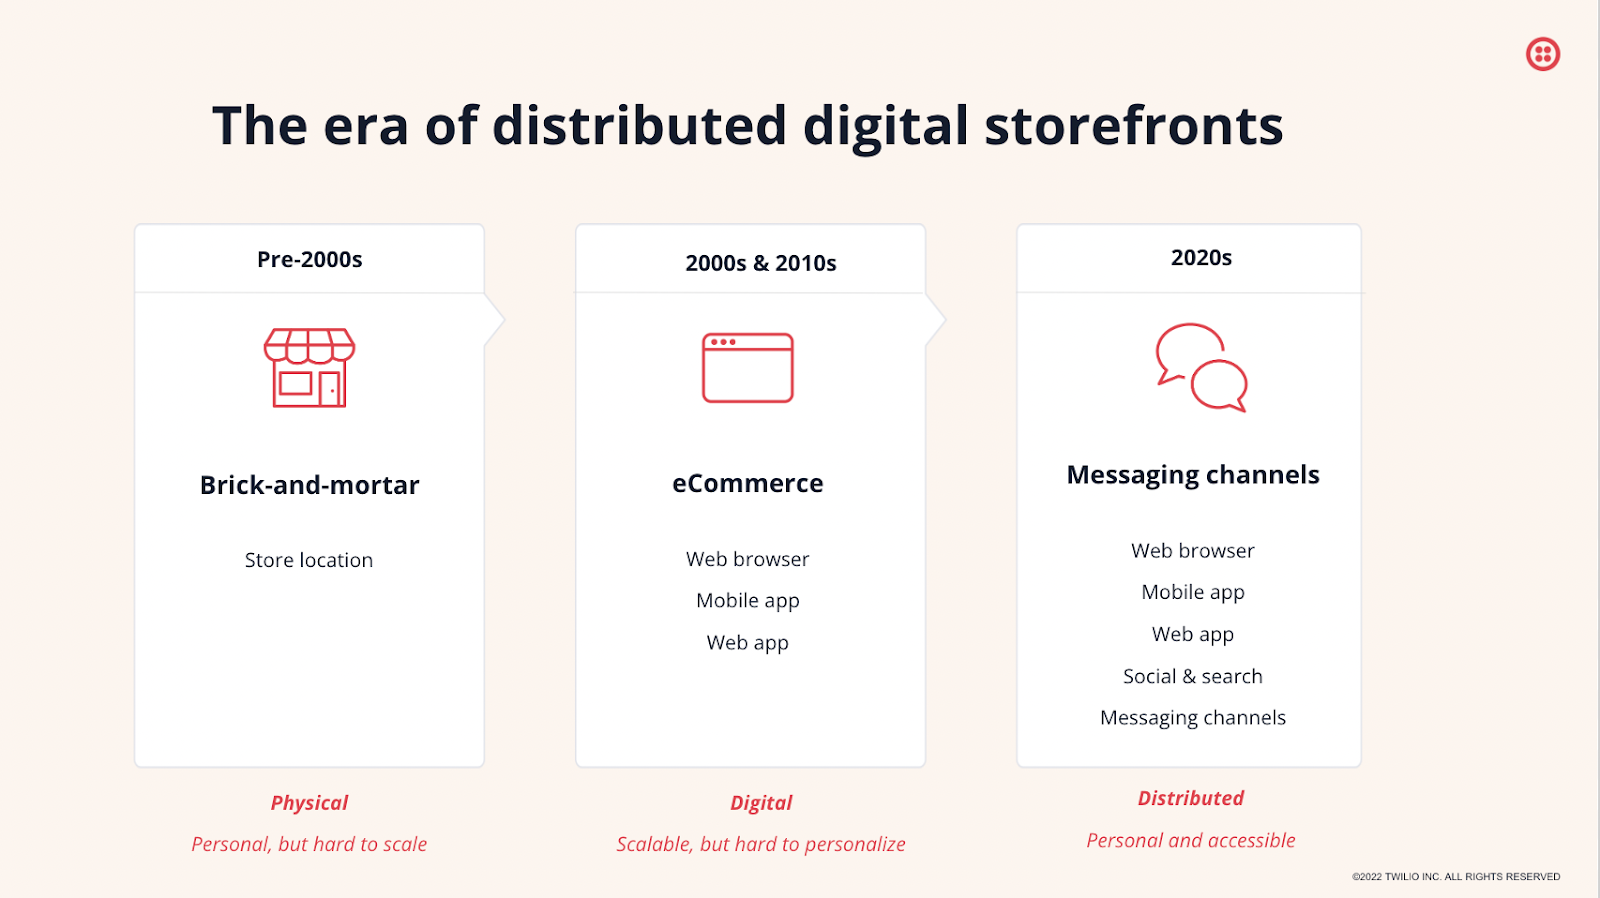 The era of distributed digital storefronts image